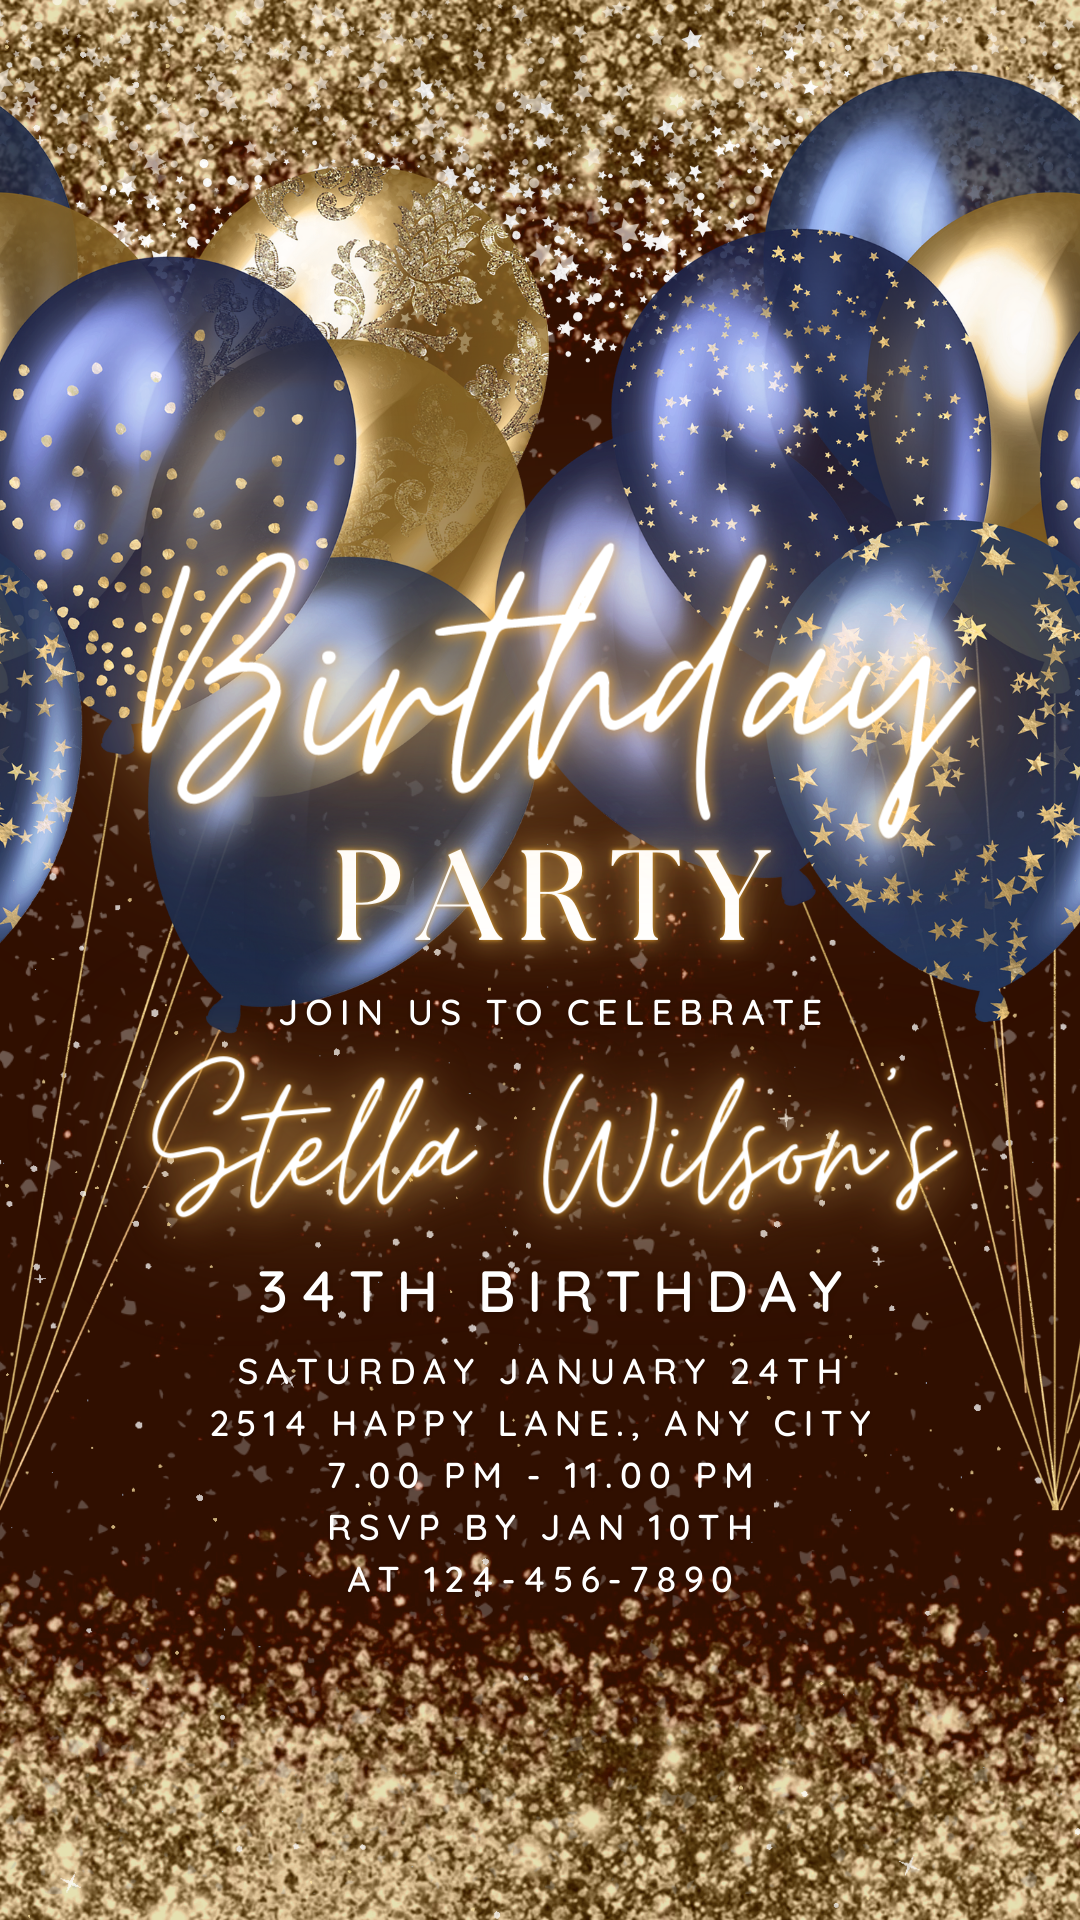 Animated Classy Birthday invitation, Night Party Invite for any Event Celebration, Editable Video Template for any Age| Digital E-vite